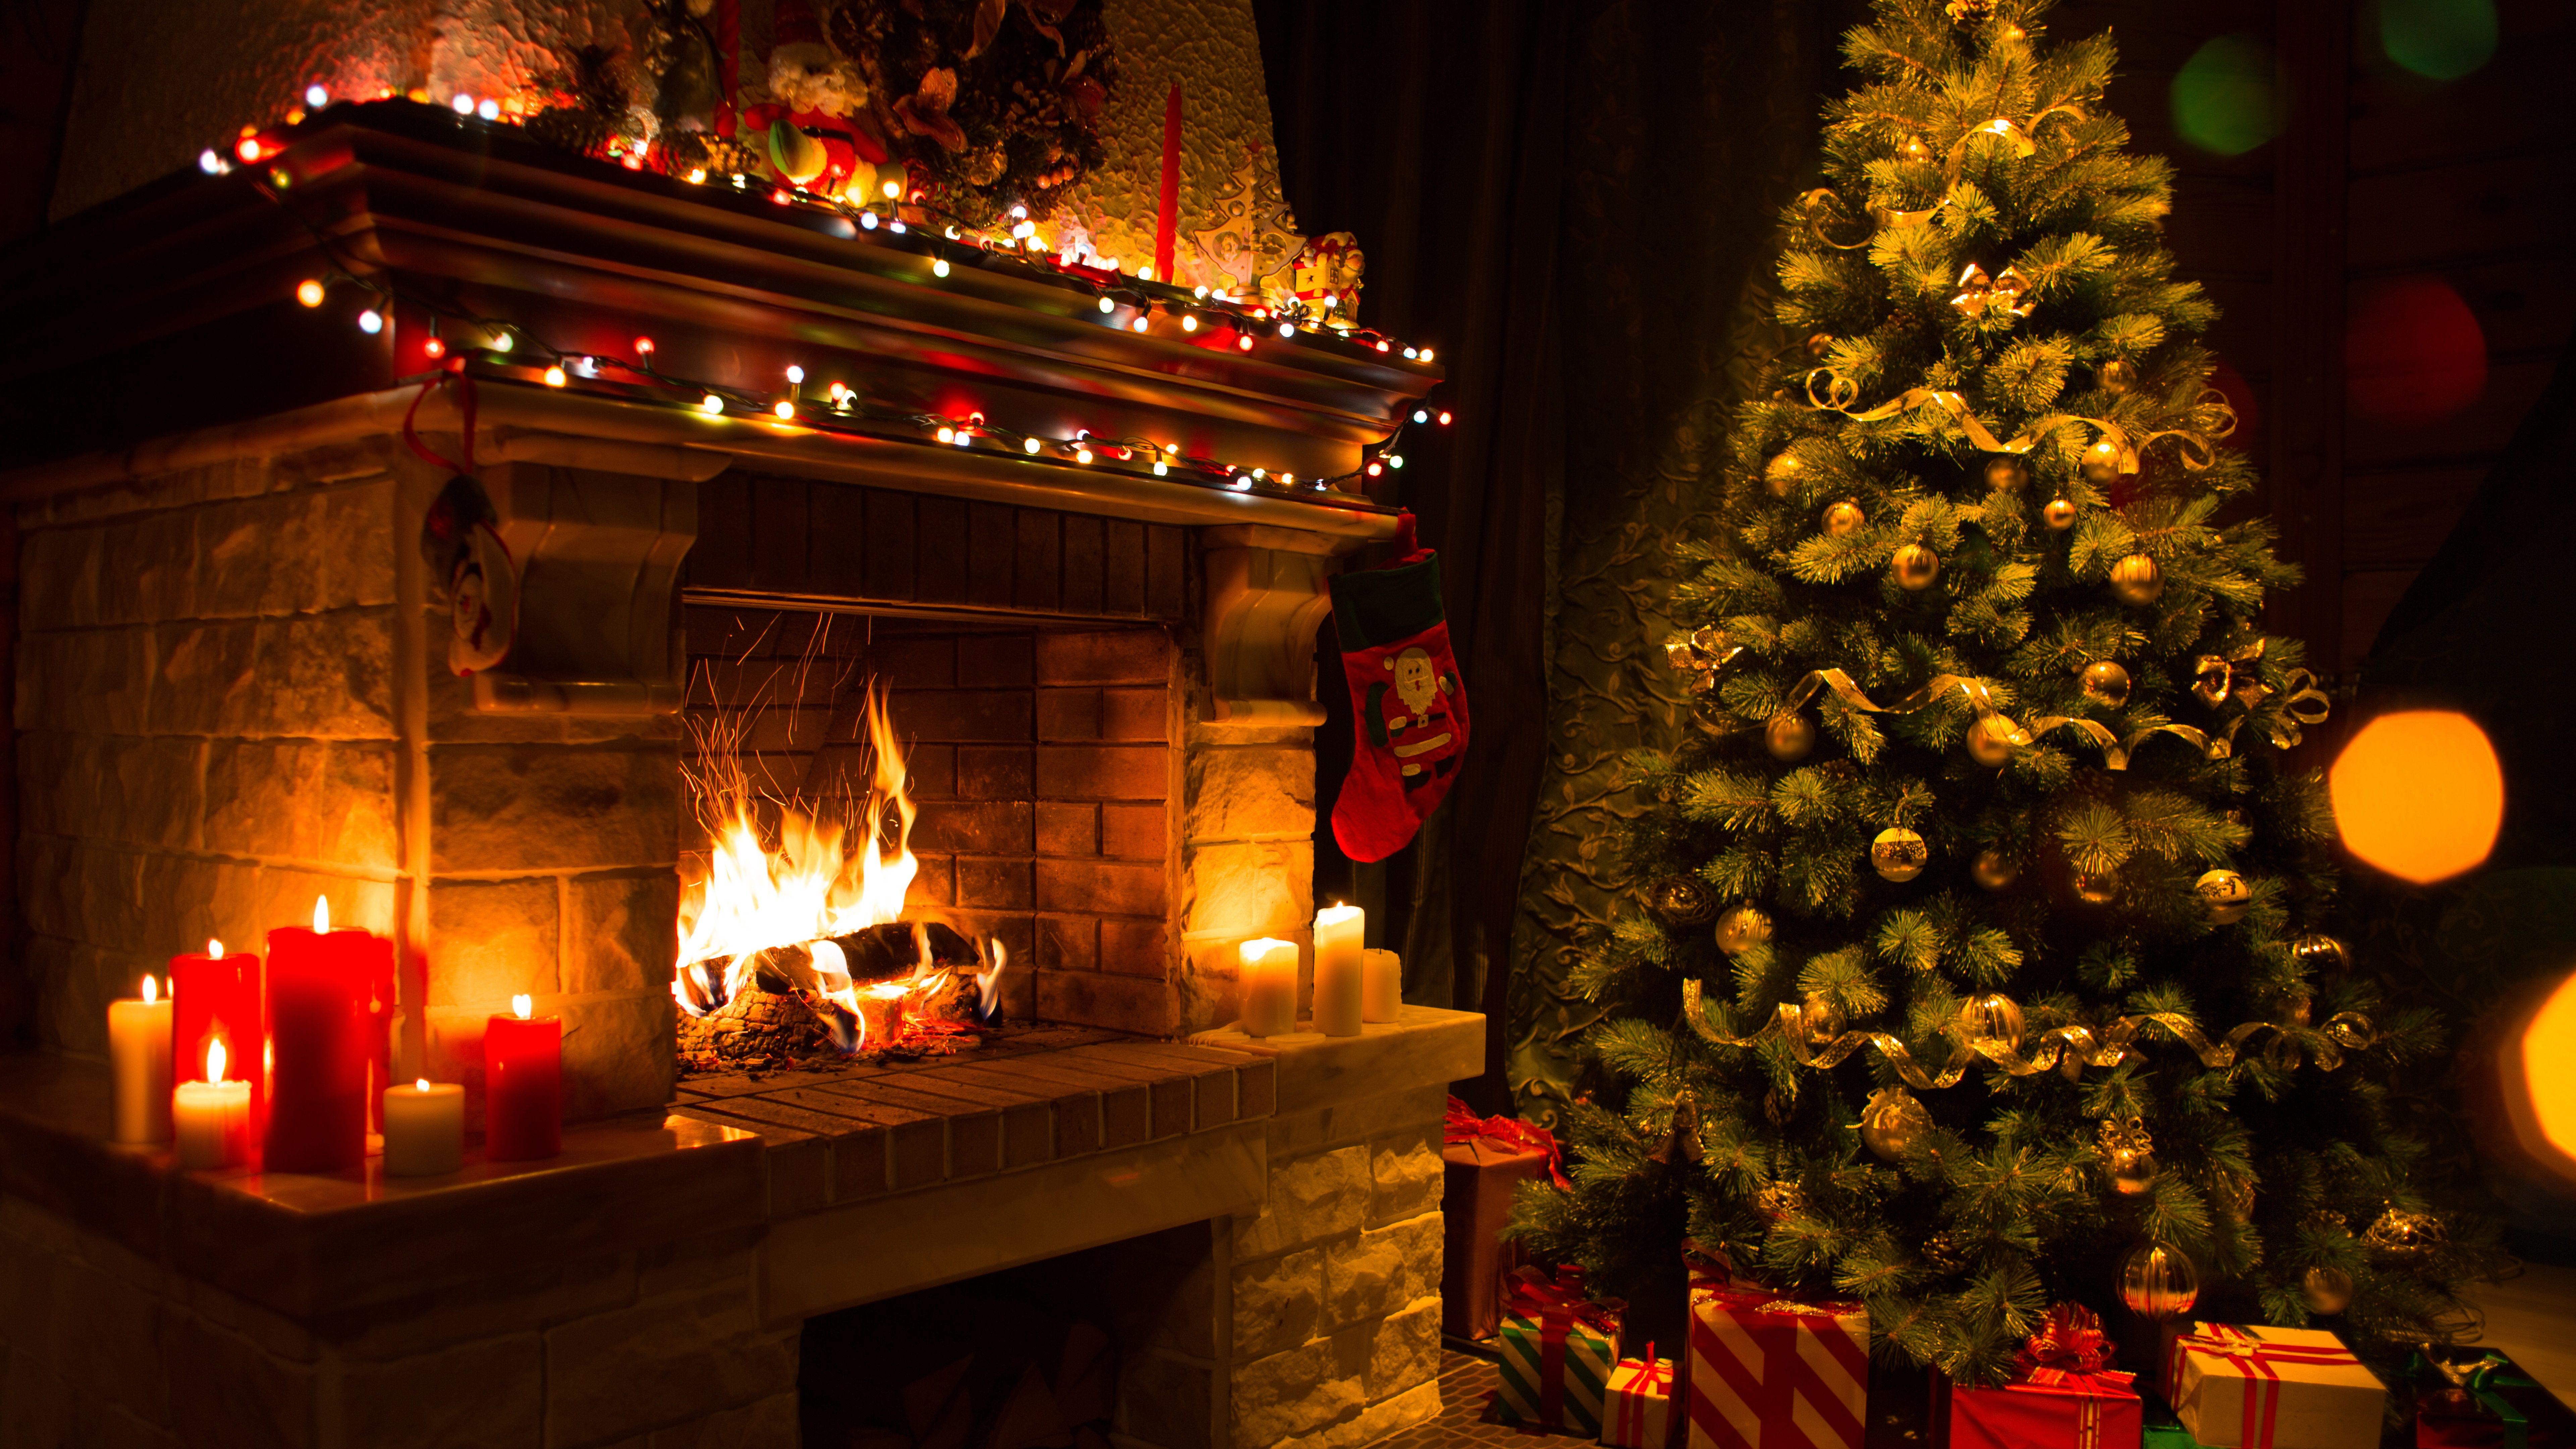 Candle Light In The Fireplace At Christmas 8K UltraHD Wallpaper